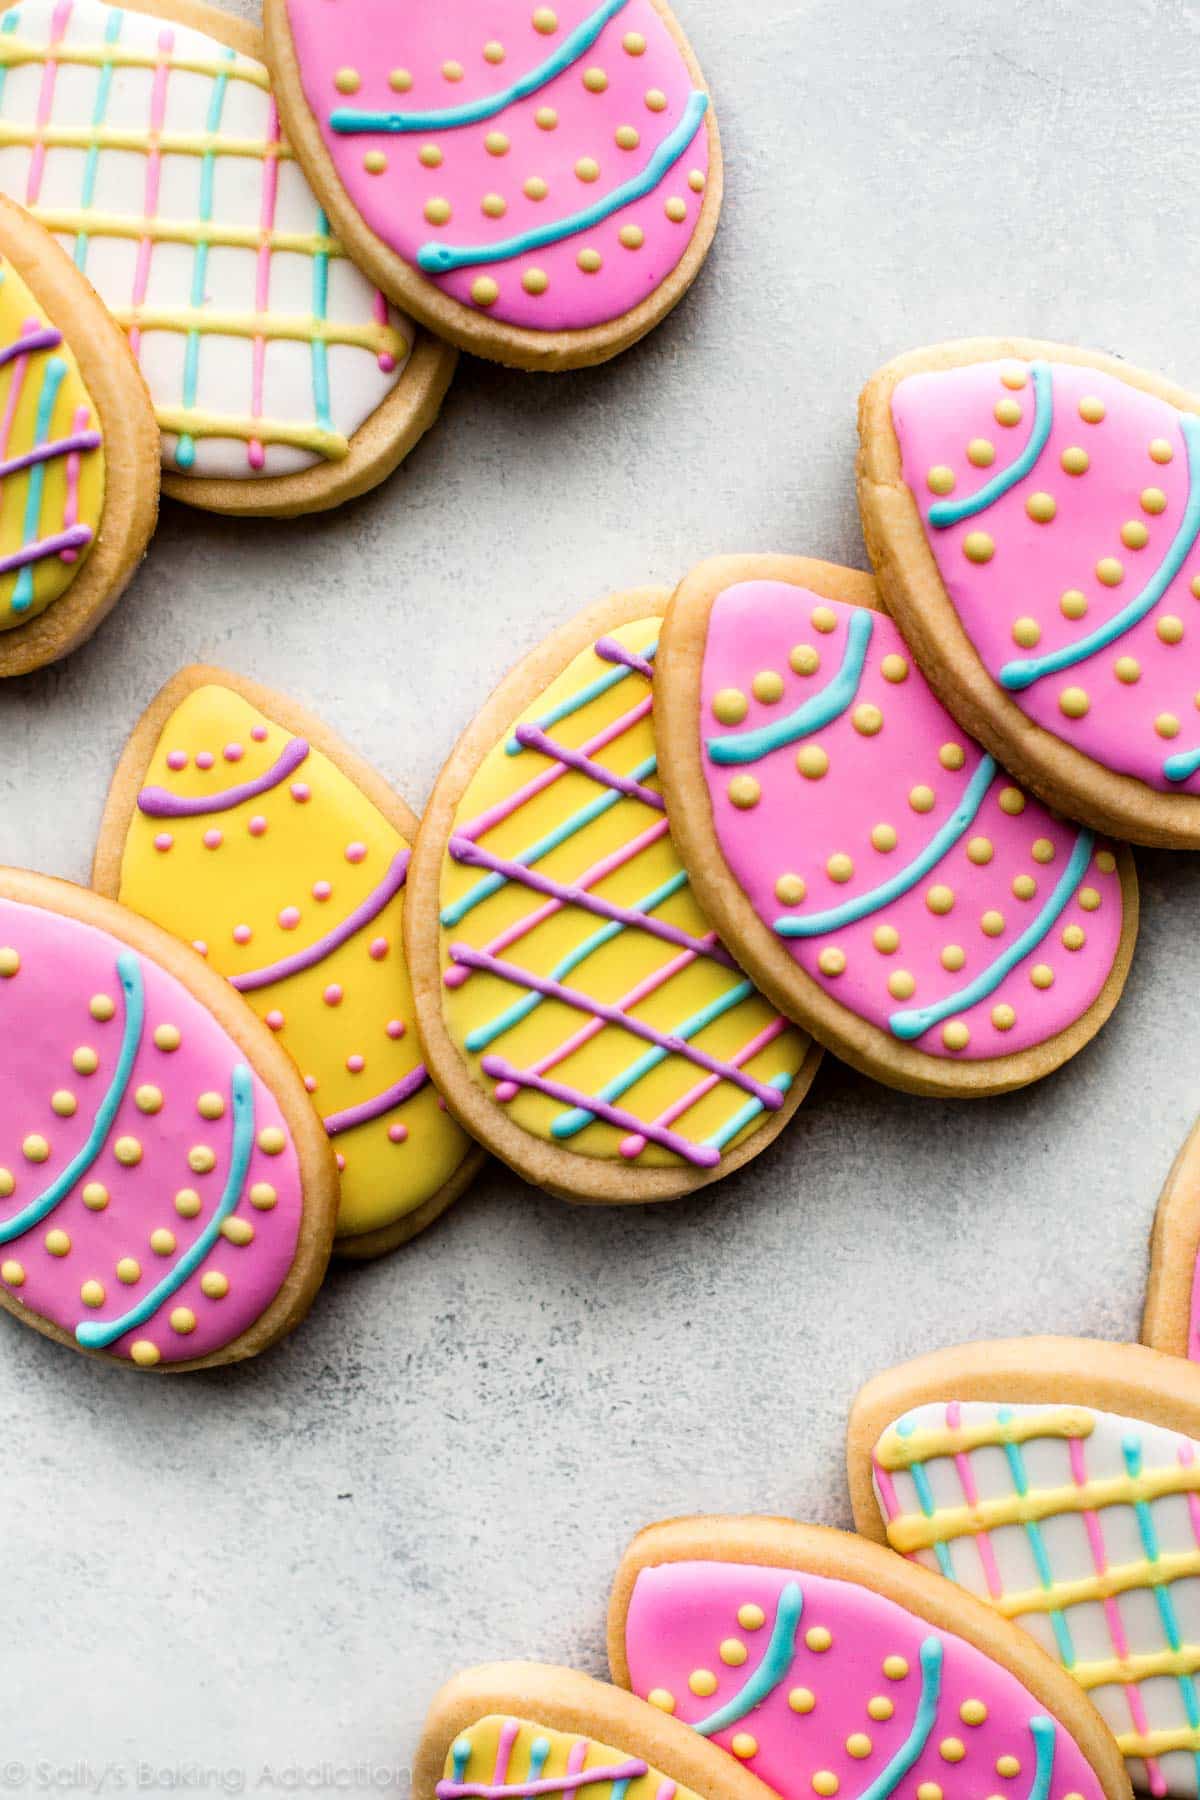 Easter Cookies (Decorated & Festive!) - Sally's Baking Addiction